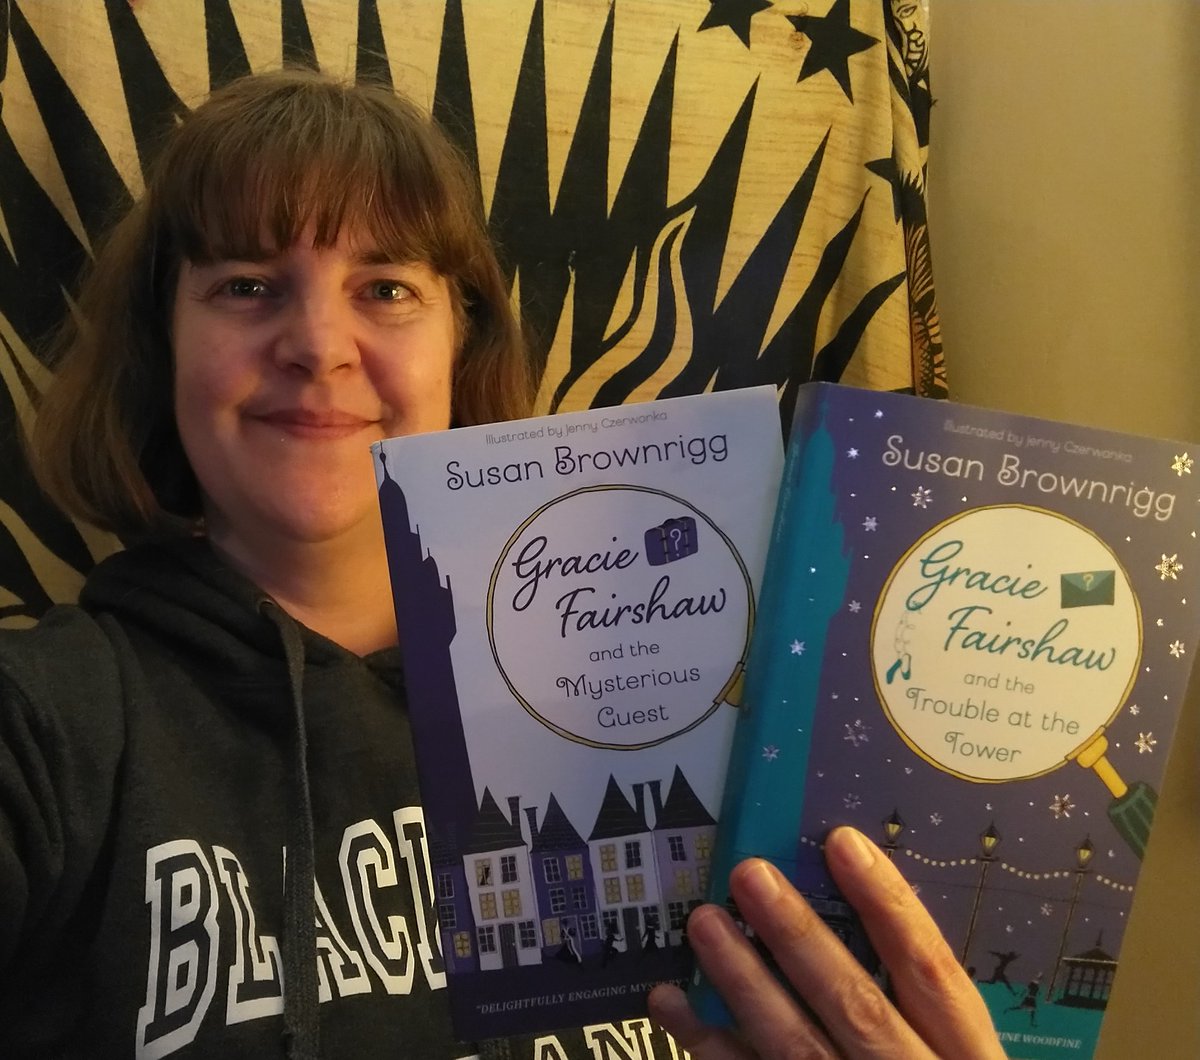 And then there were two! Trouble at the Tower is out now! Return to #Blackpool with #GracieFairshaw! Support your local independent booksellers. Signed copies from @BeyondBooksLtd #PublicationDay #bookbirthday  #childrensbooksnorth @publishinguclan @SCBWI_BI